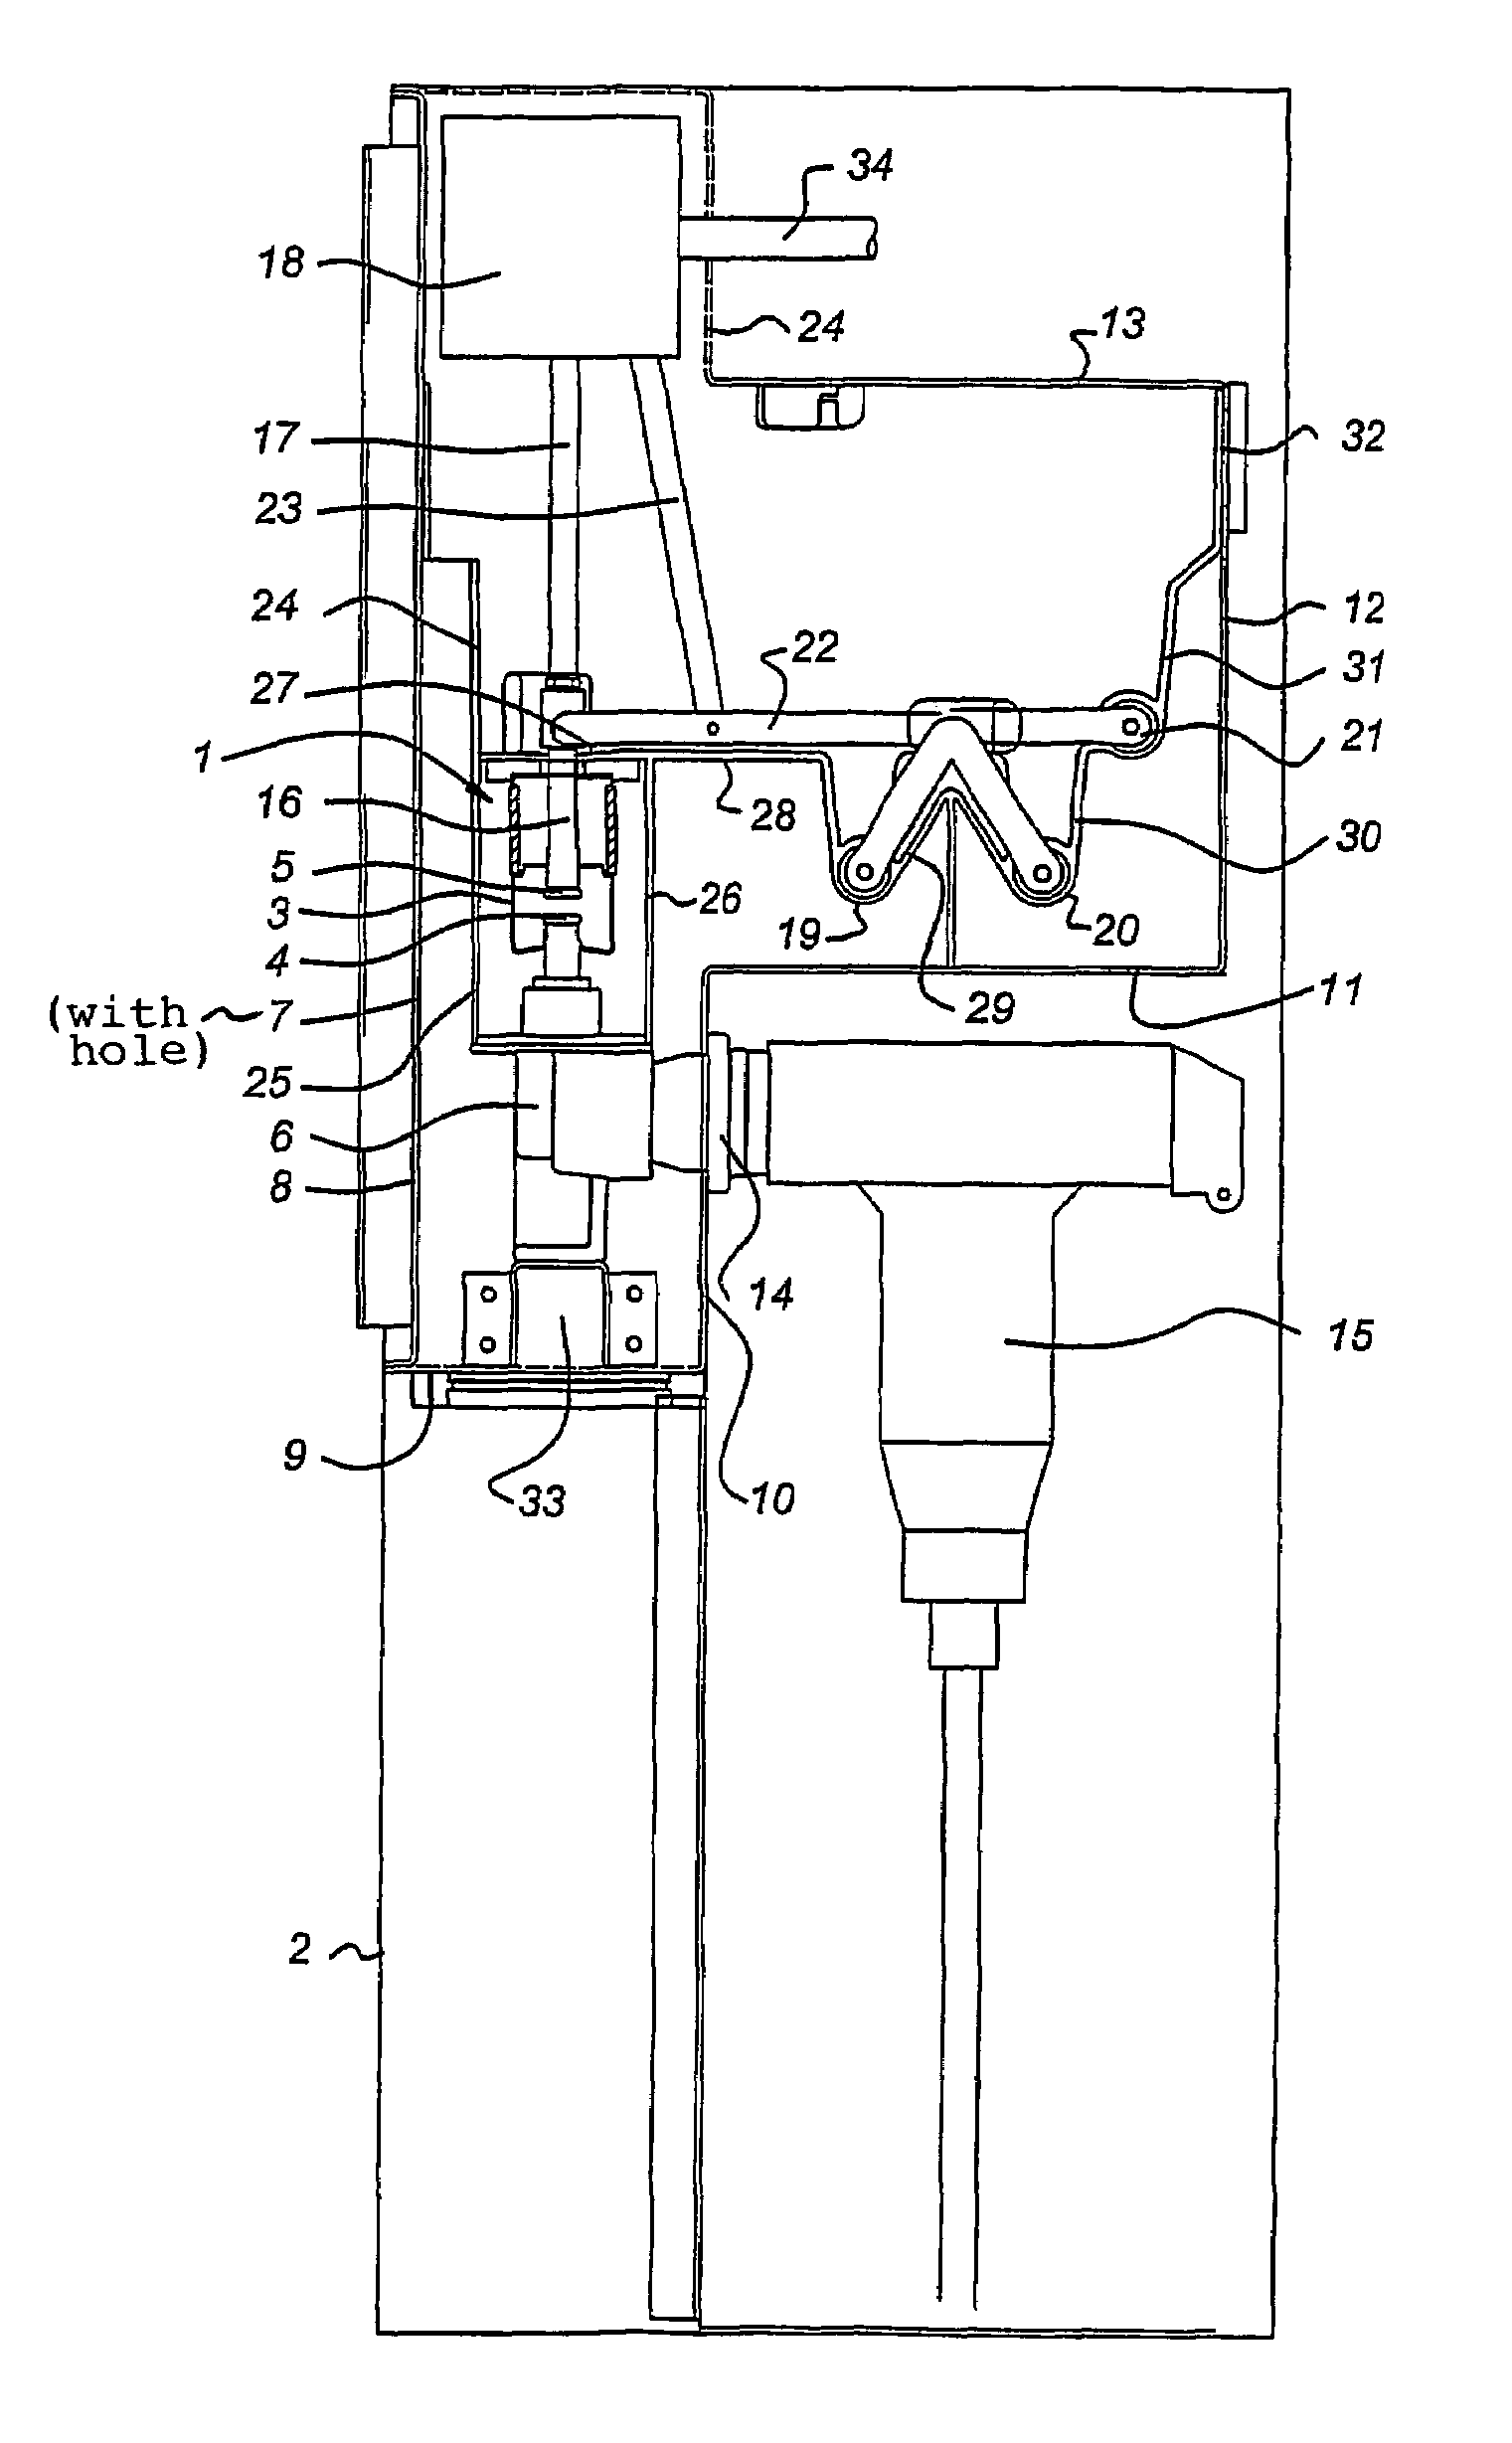 Single phase or polyphase switchgear in an enveloping housing